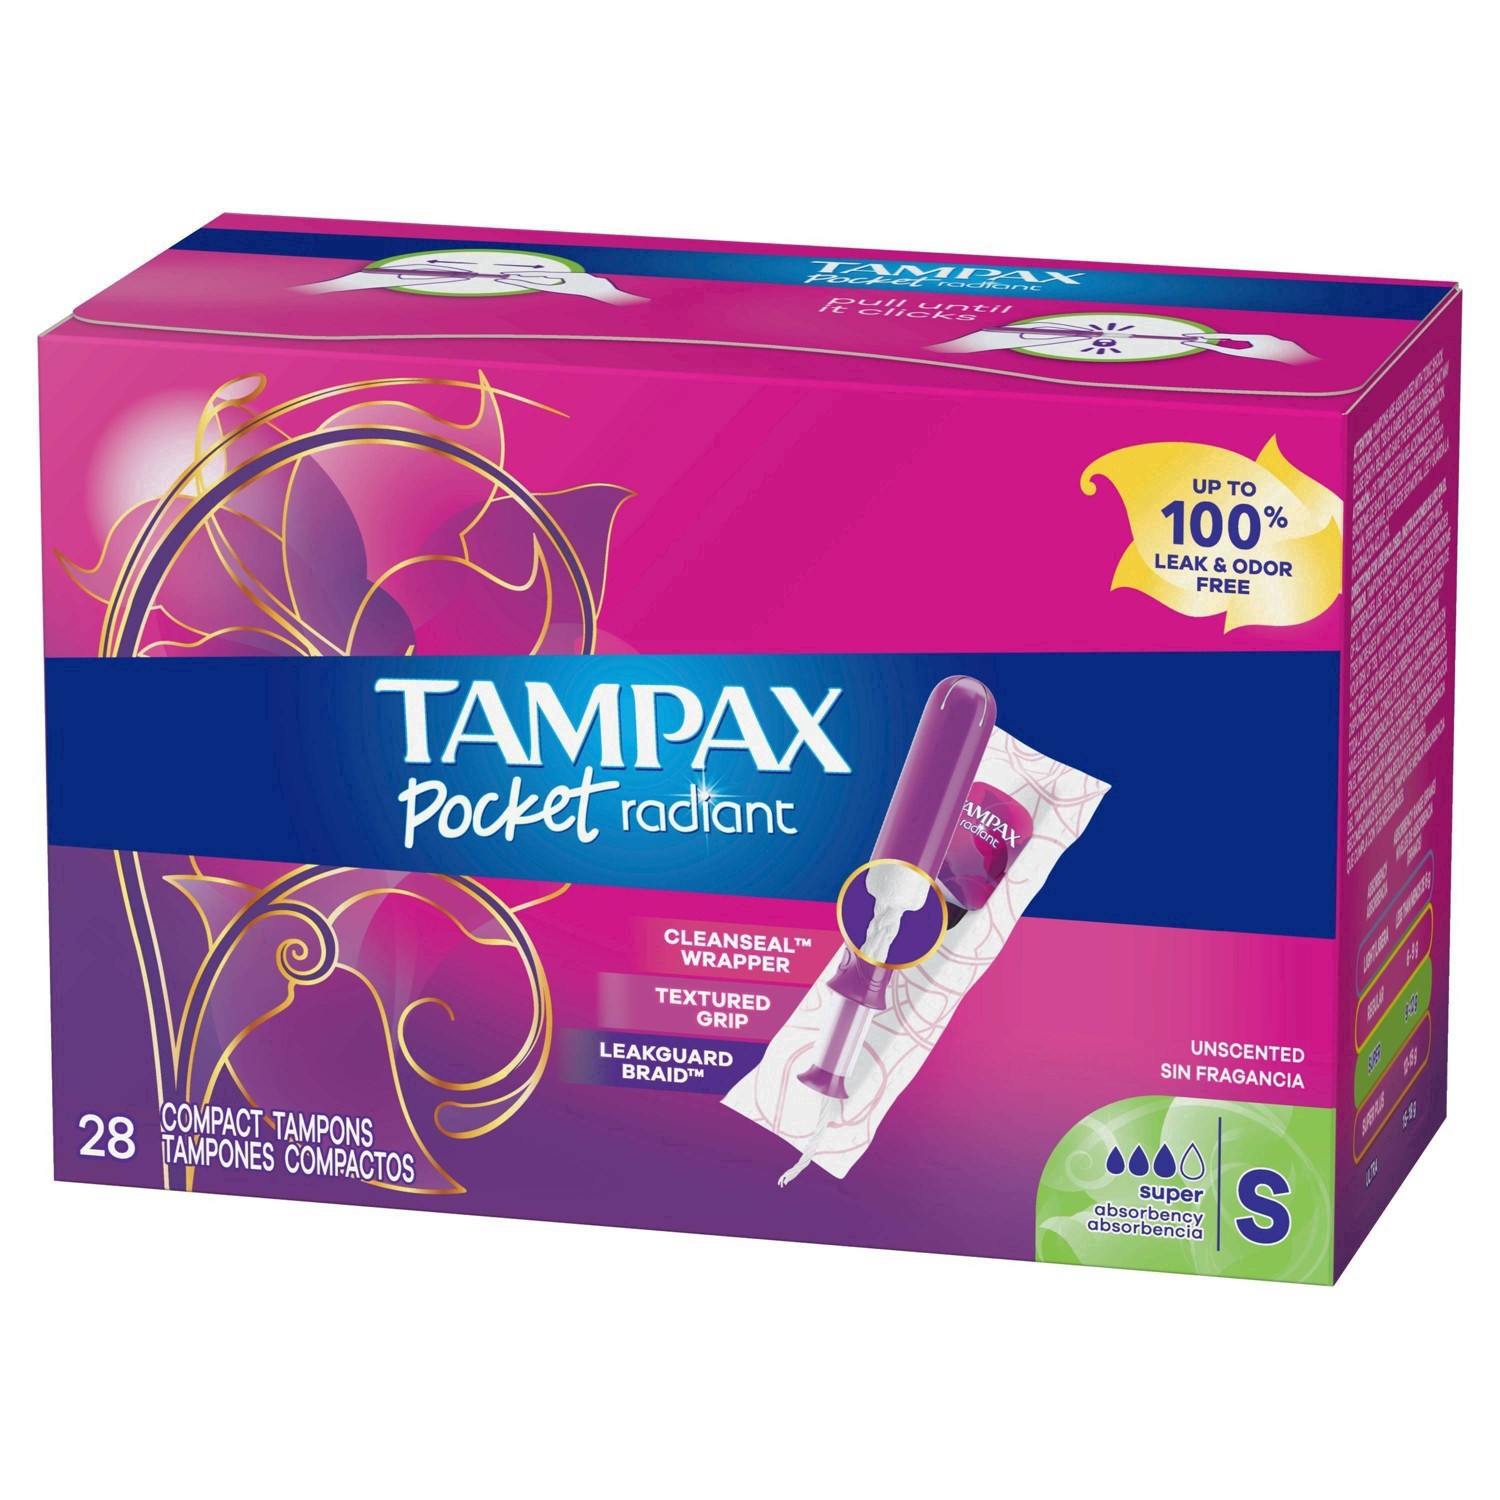 slide 43 of 94, Tampax Pocket Radiant Compact Plastic Tampons, With LeakGuard Braid, Super Absorbency, Unscented, 28 Count, 28 ct